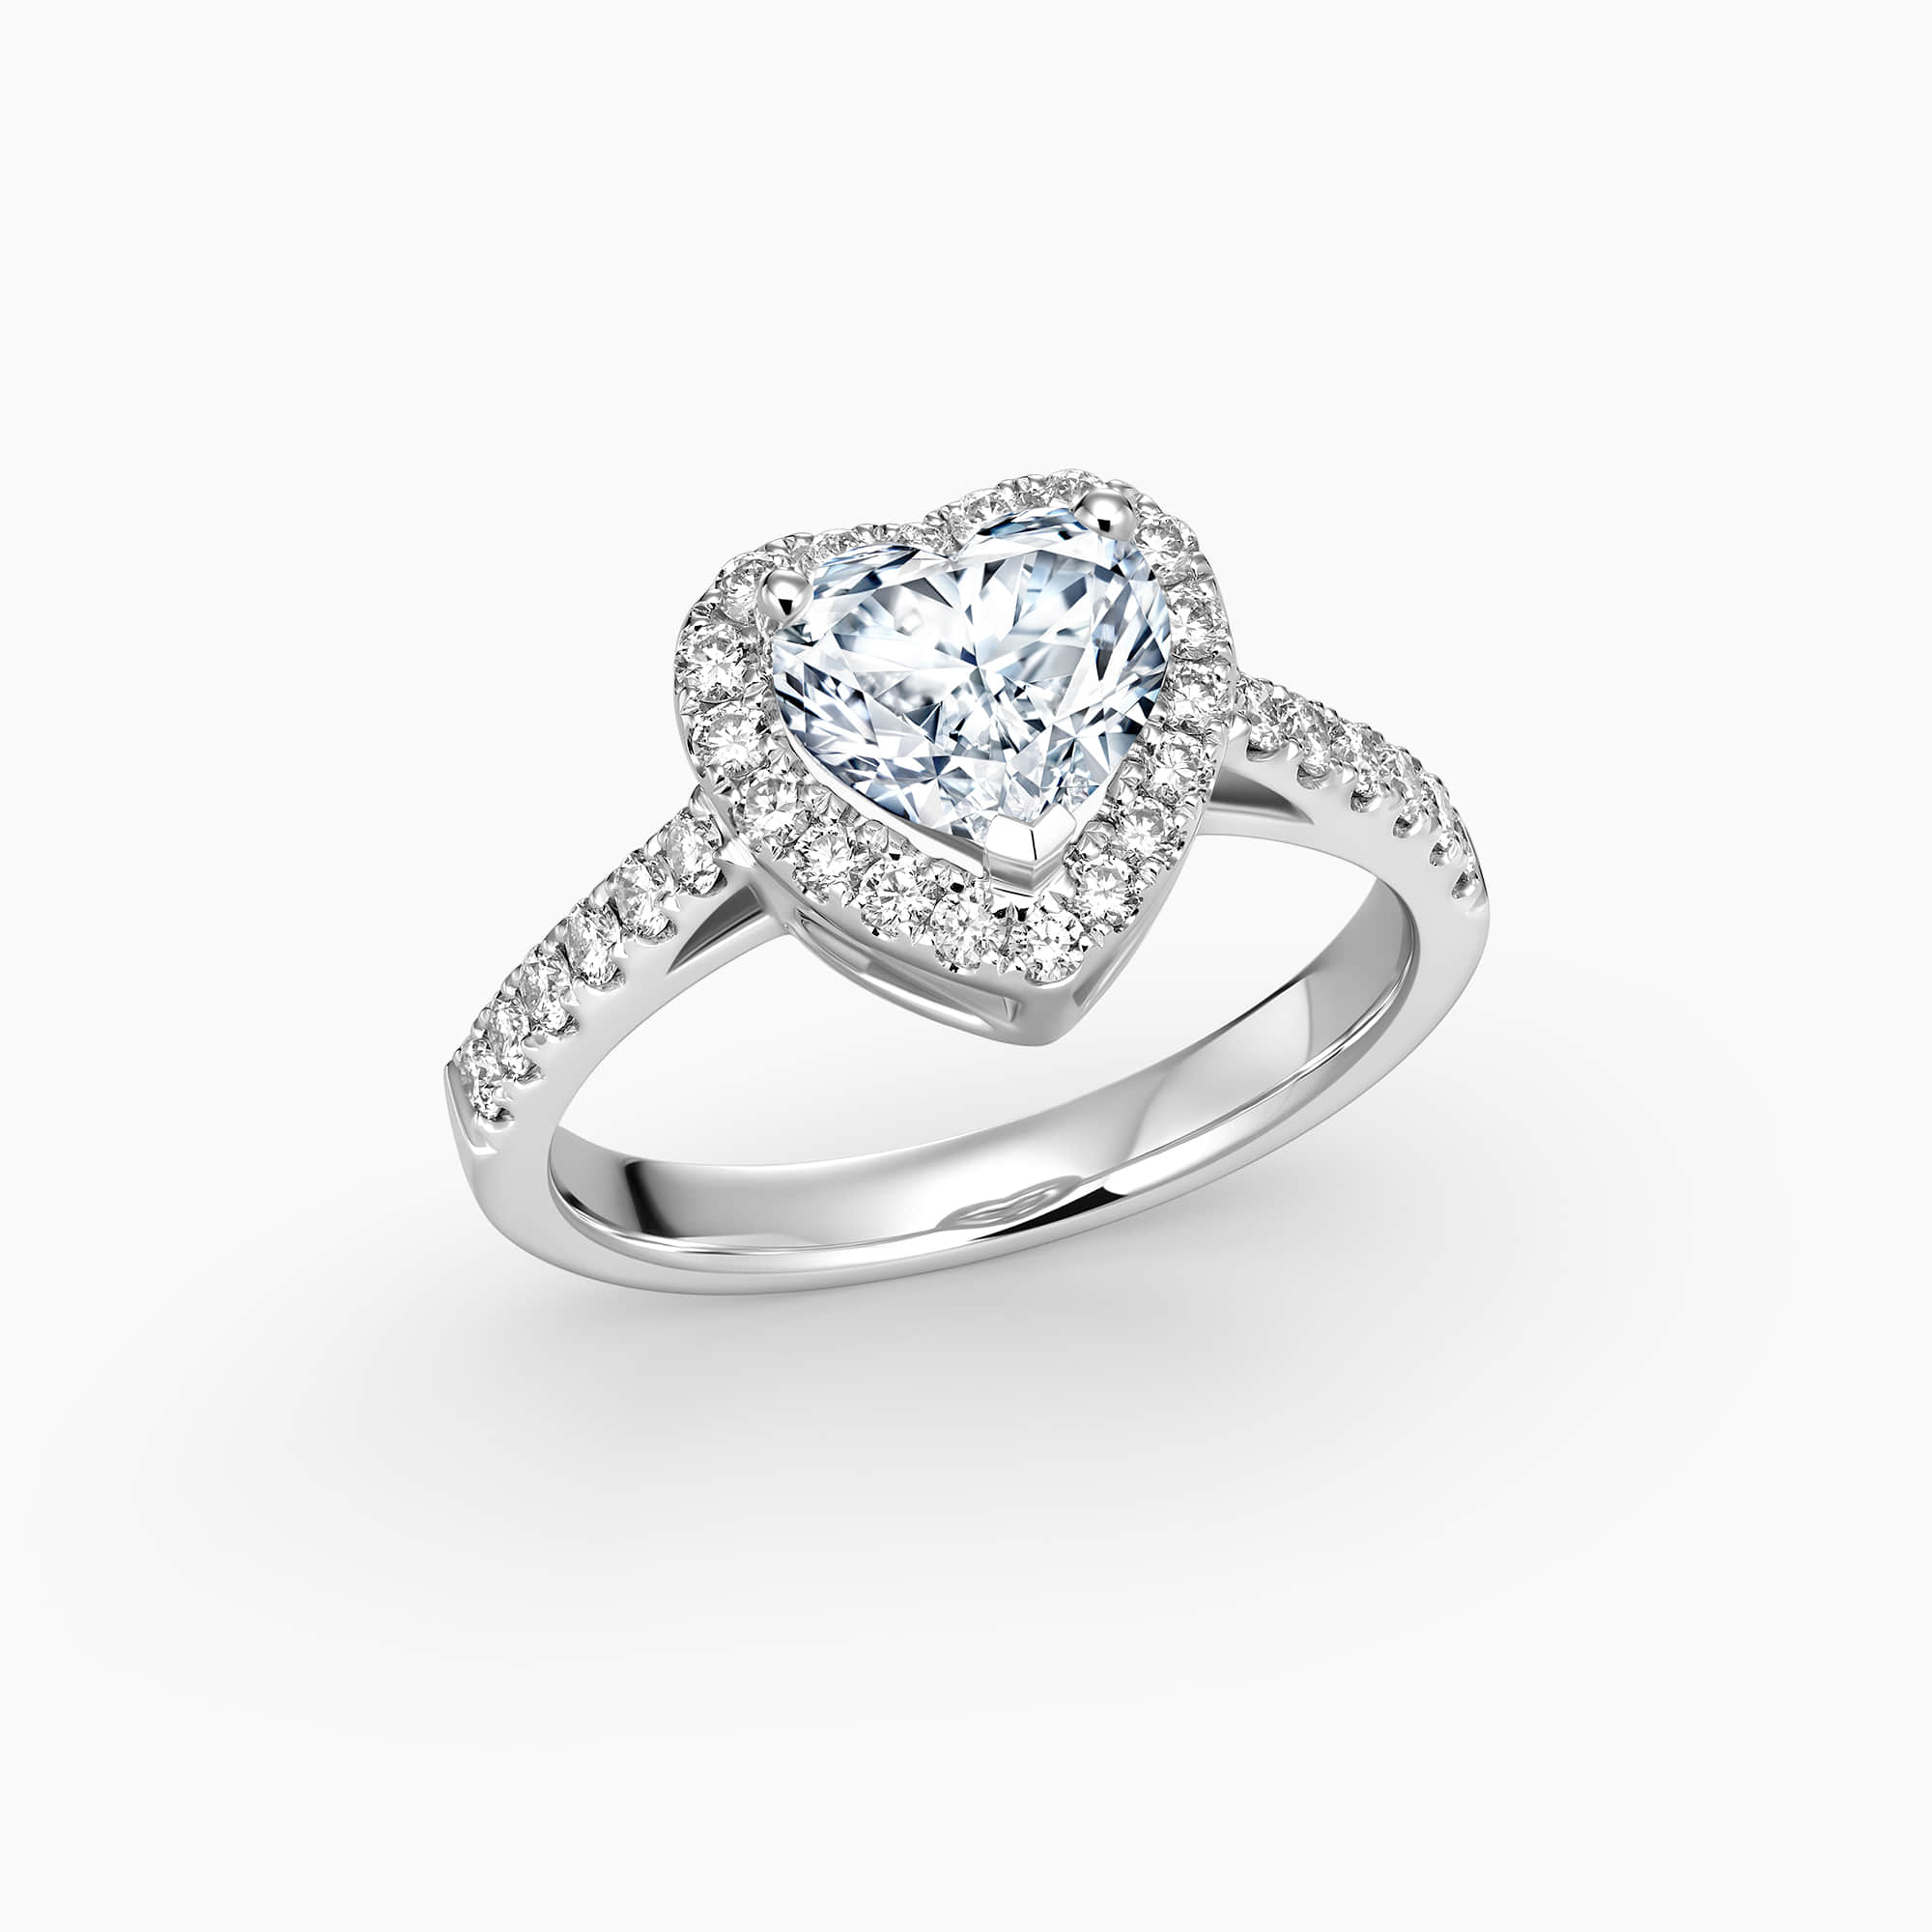 Darry Ring heart shaped engagement ring with halo top view